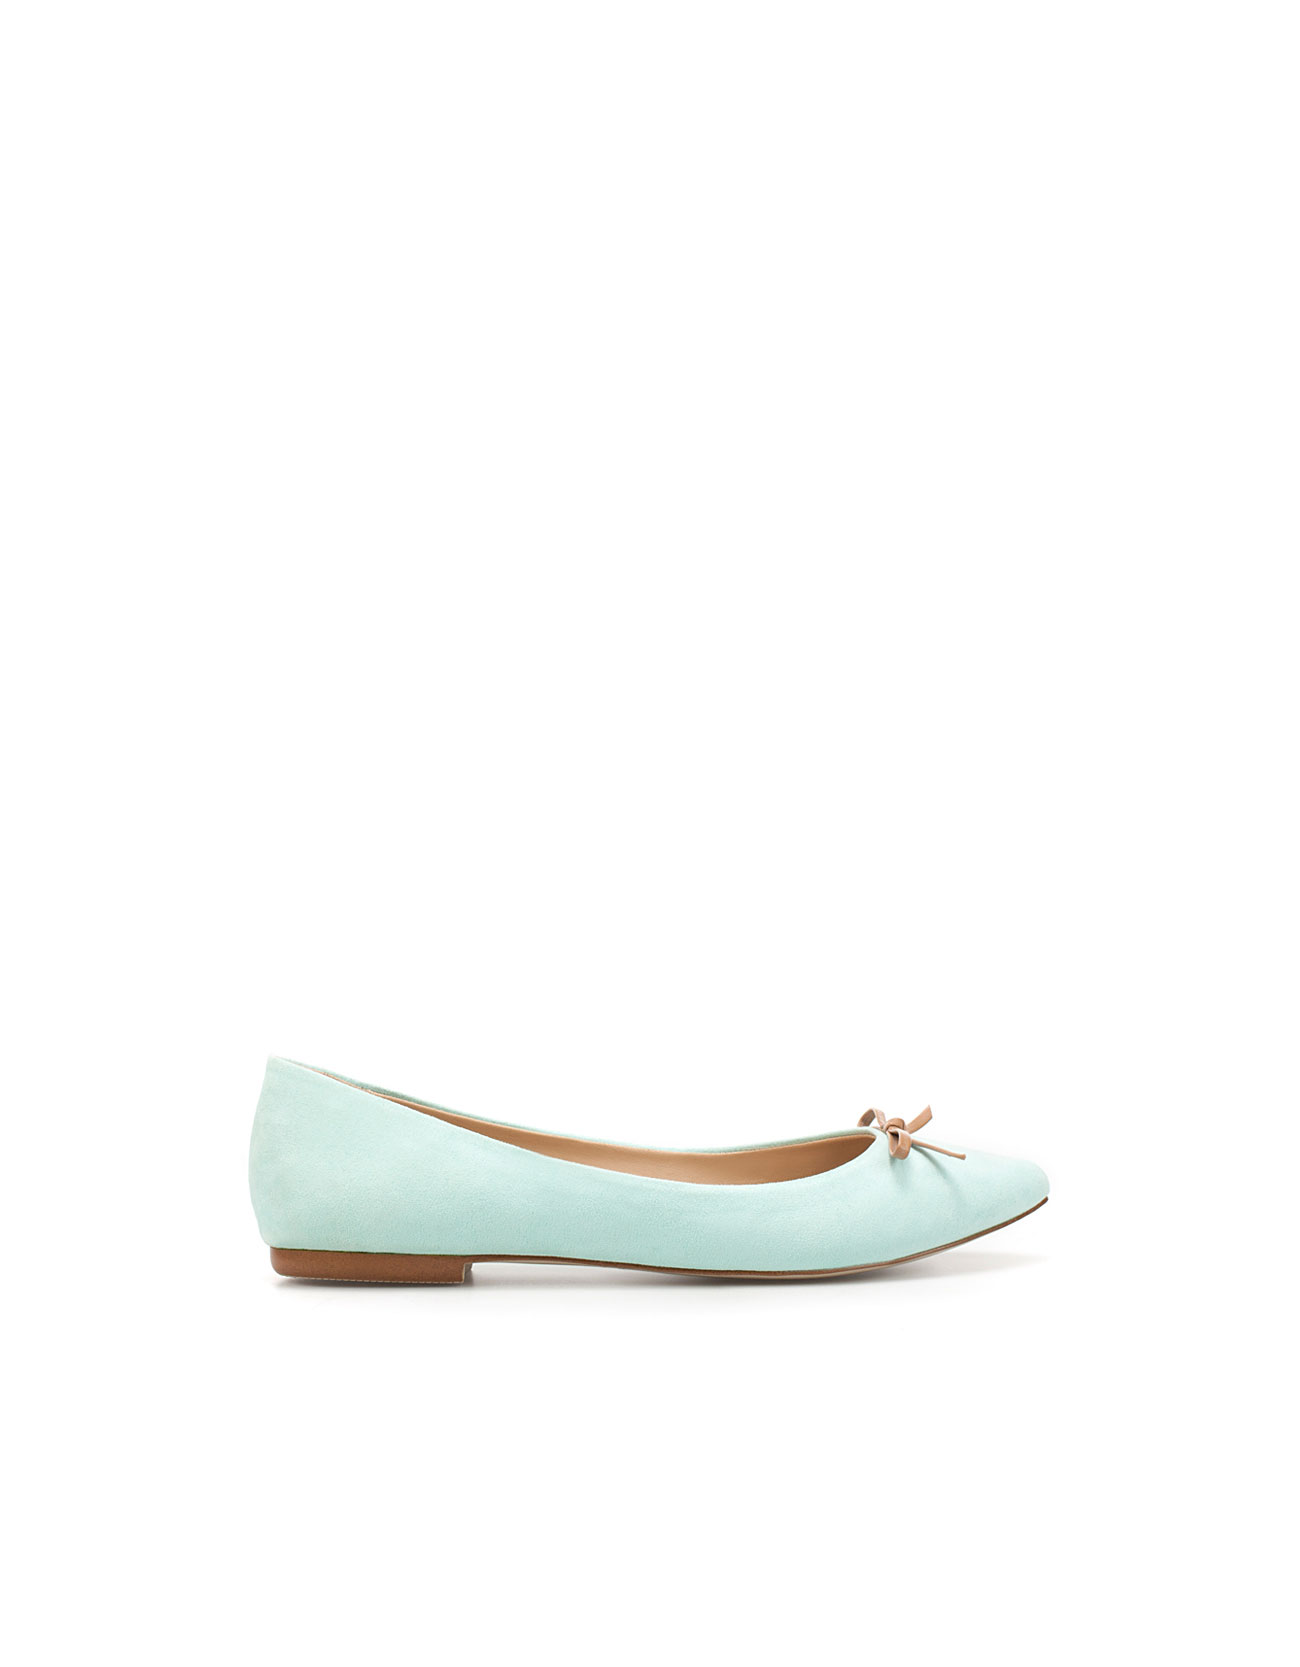 Zara Pointed Ballerinas with Bow in Green (457) | Lyst